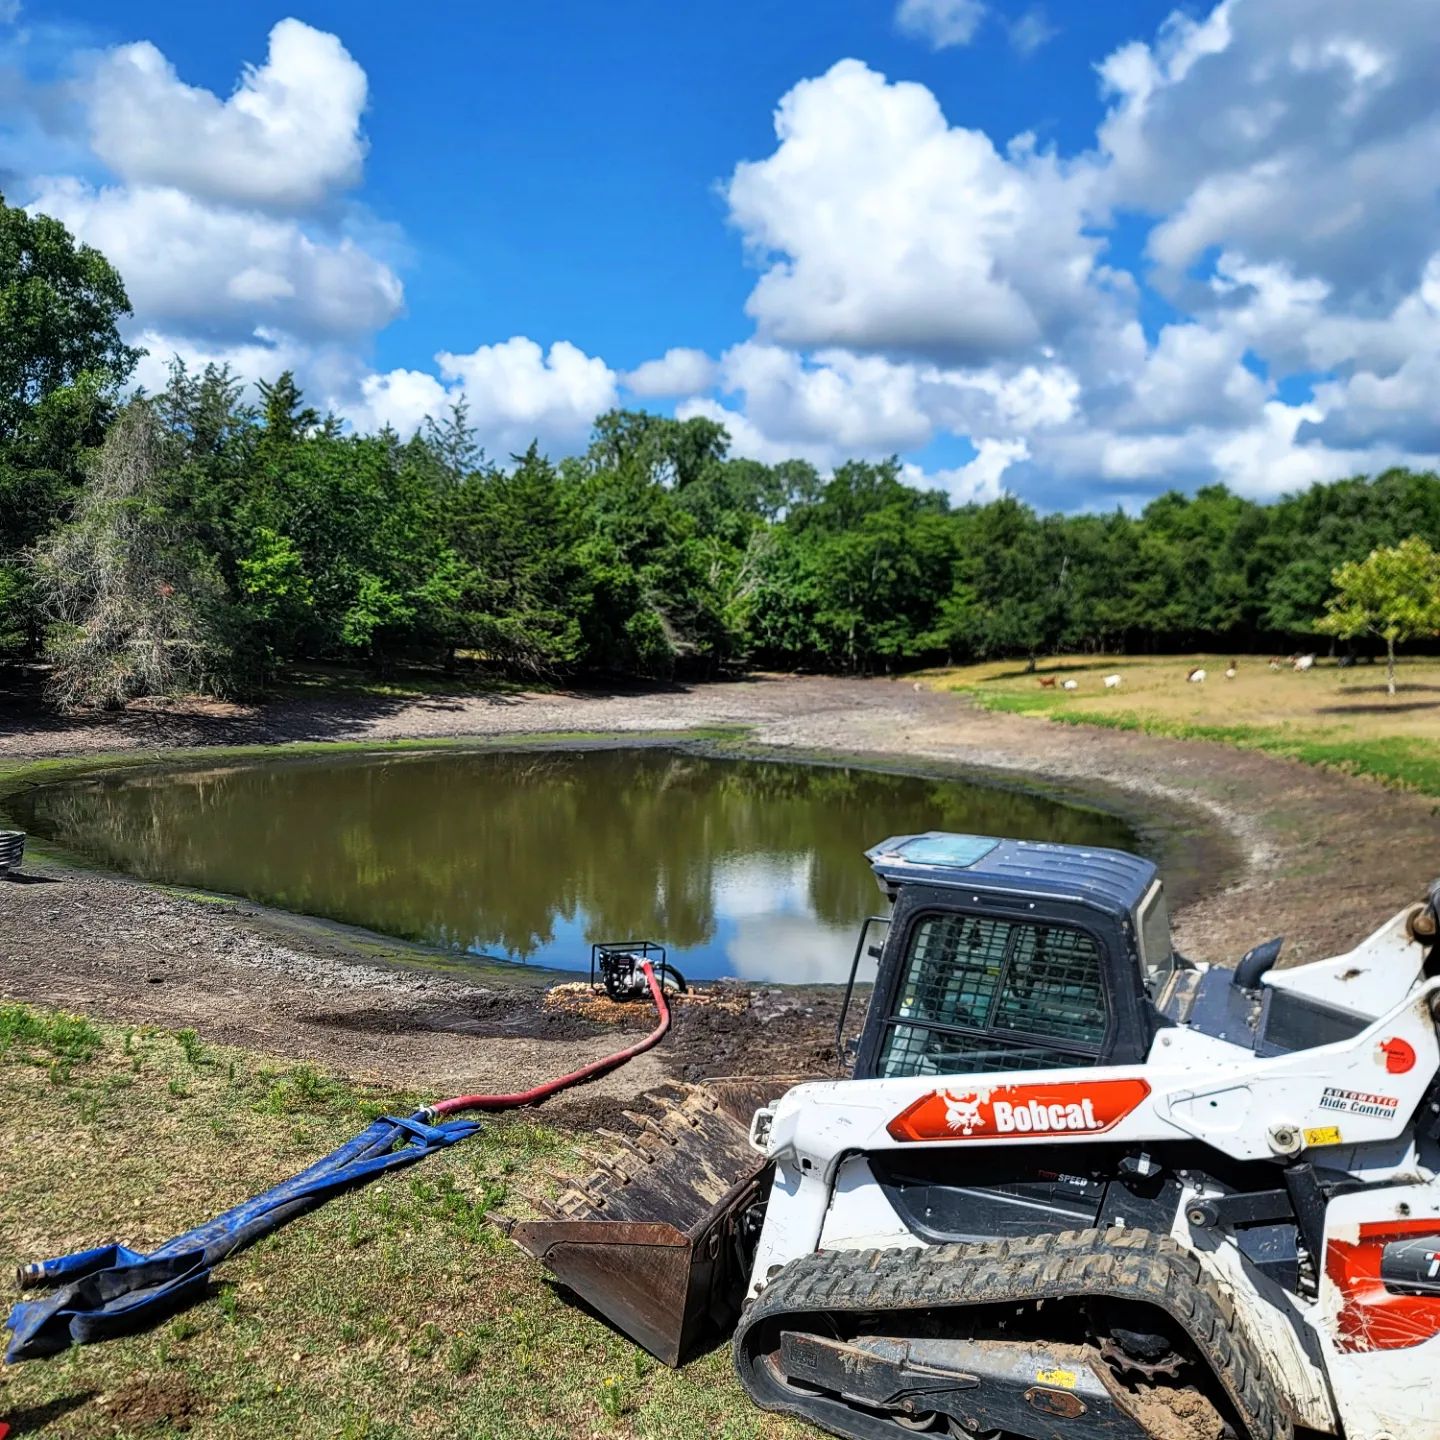 Pond in the background with a bobcat tractor in the foreground